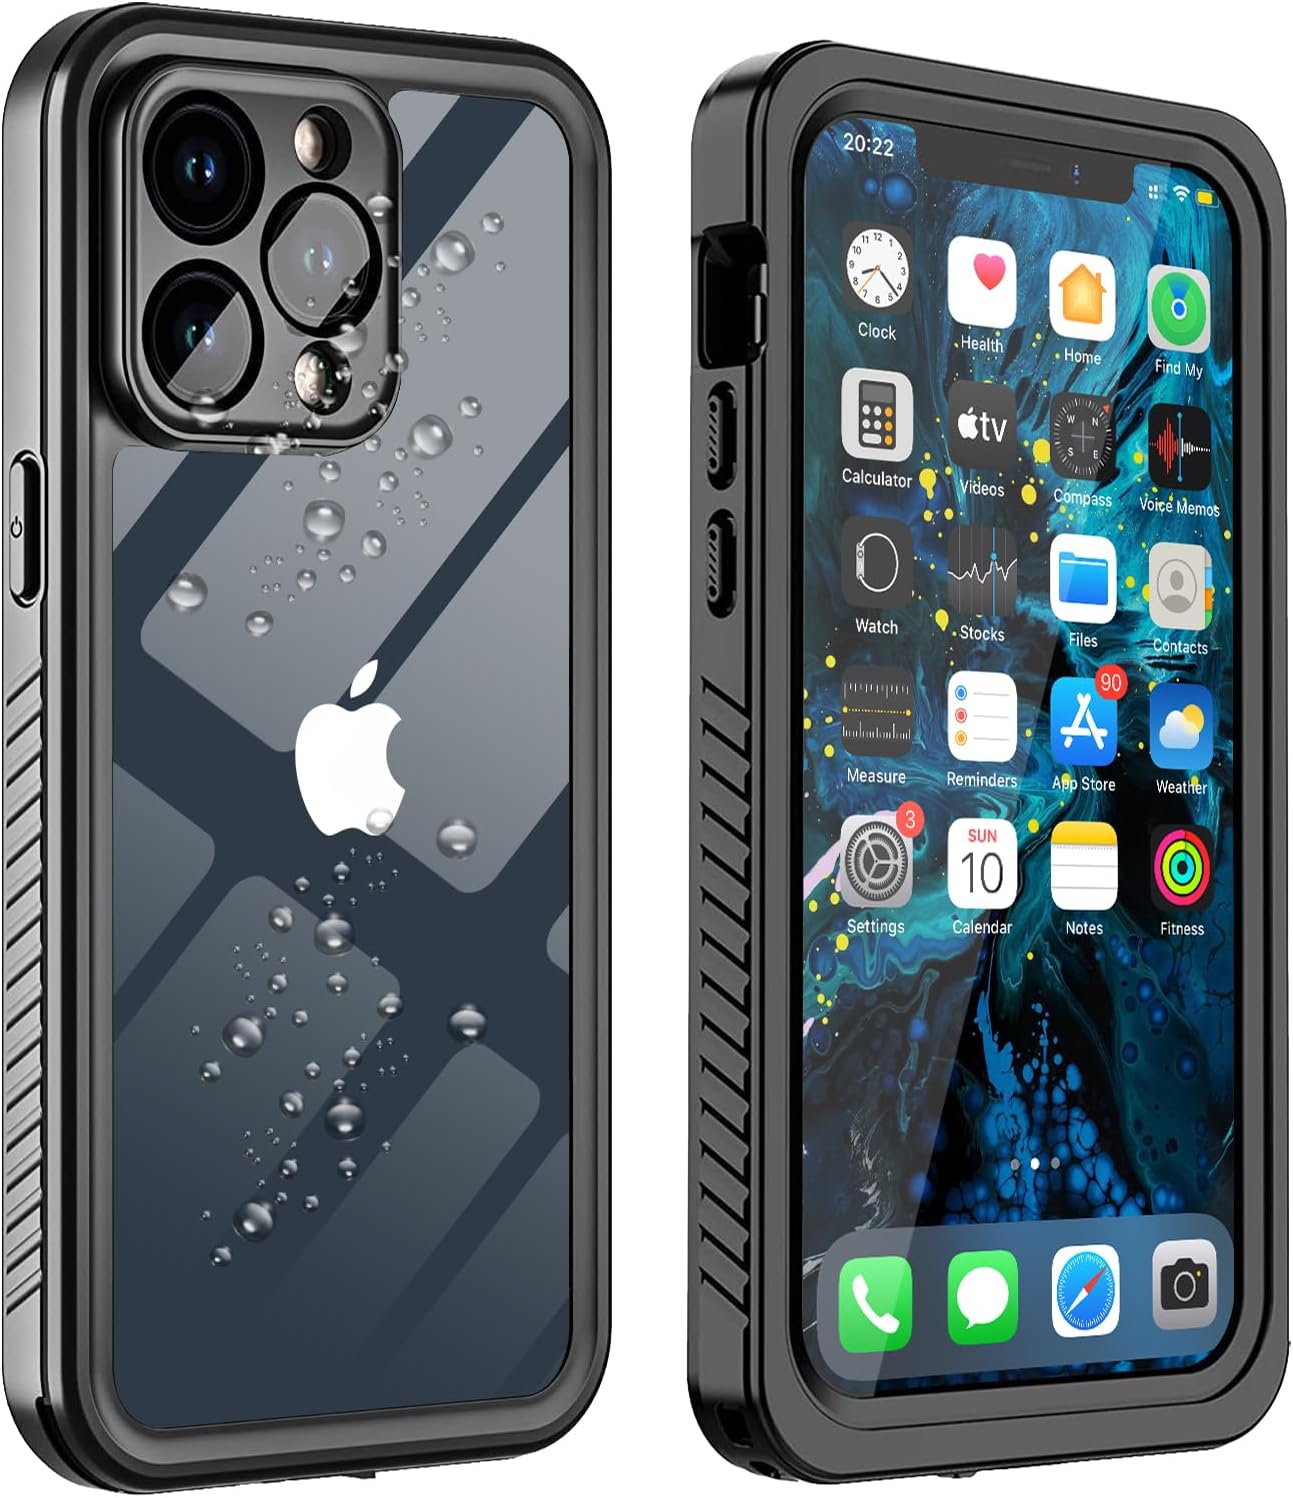 IUGOBI for iPhone 15 Pro Max Case Waterproof, Built-in Screen Protector Full Sealed Cover, Shockproof IP68 Waterproof Clear Case for iPhone 15 Pro Max 6.7 inch